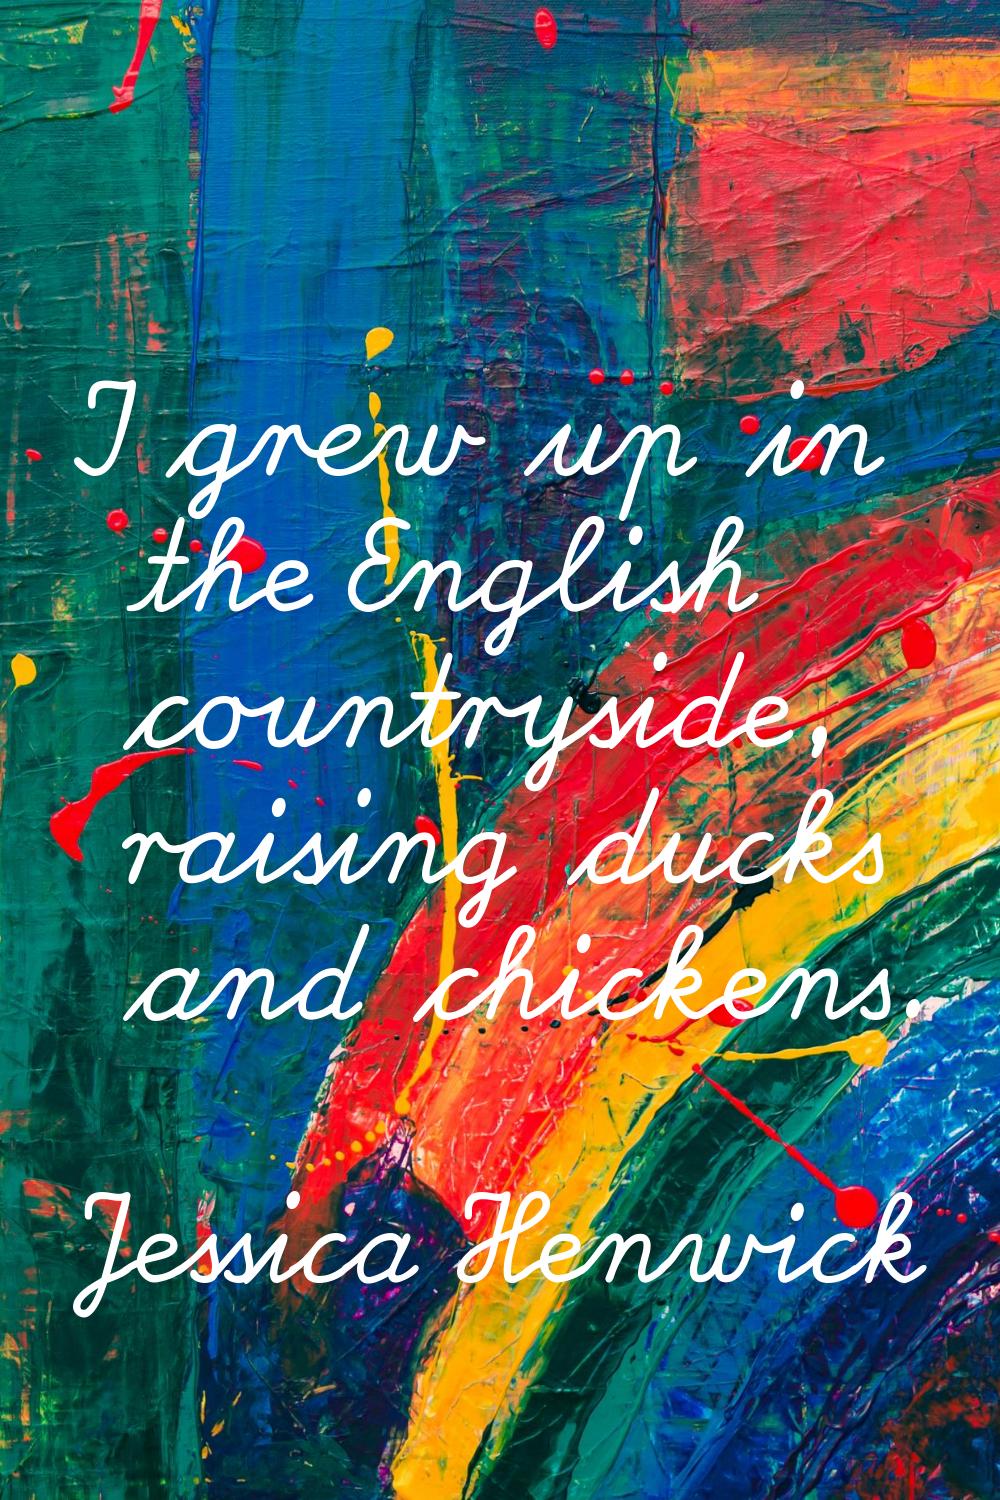 I grew up in the English countryside, raising ducks and chickens.